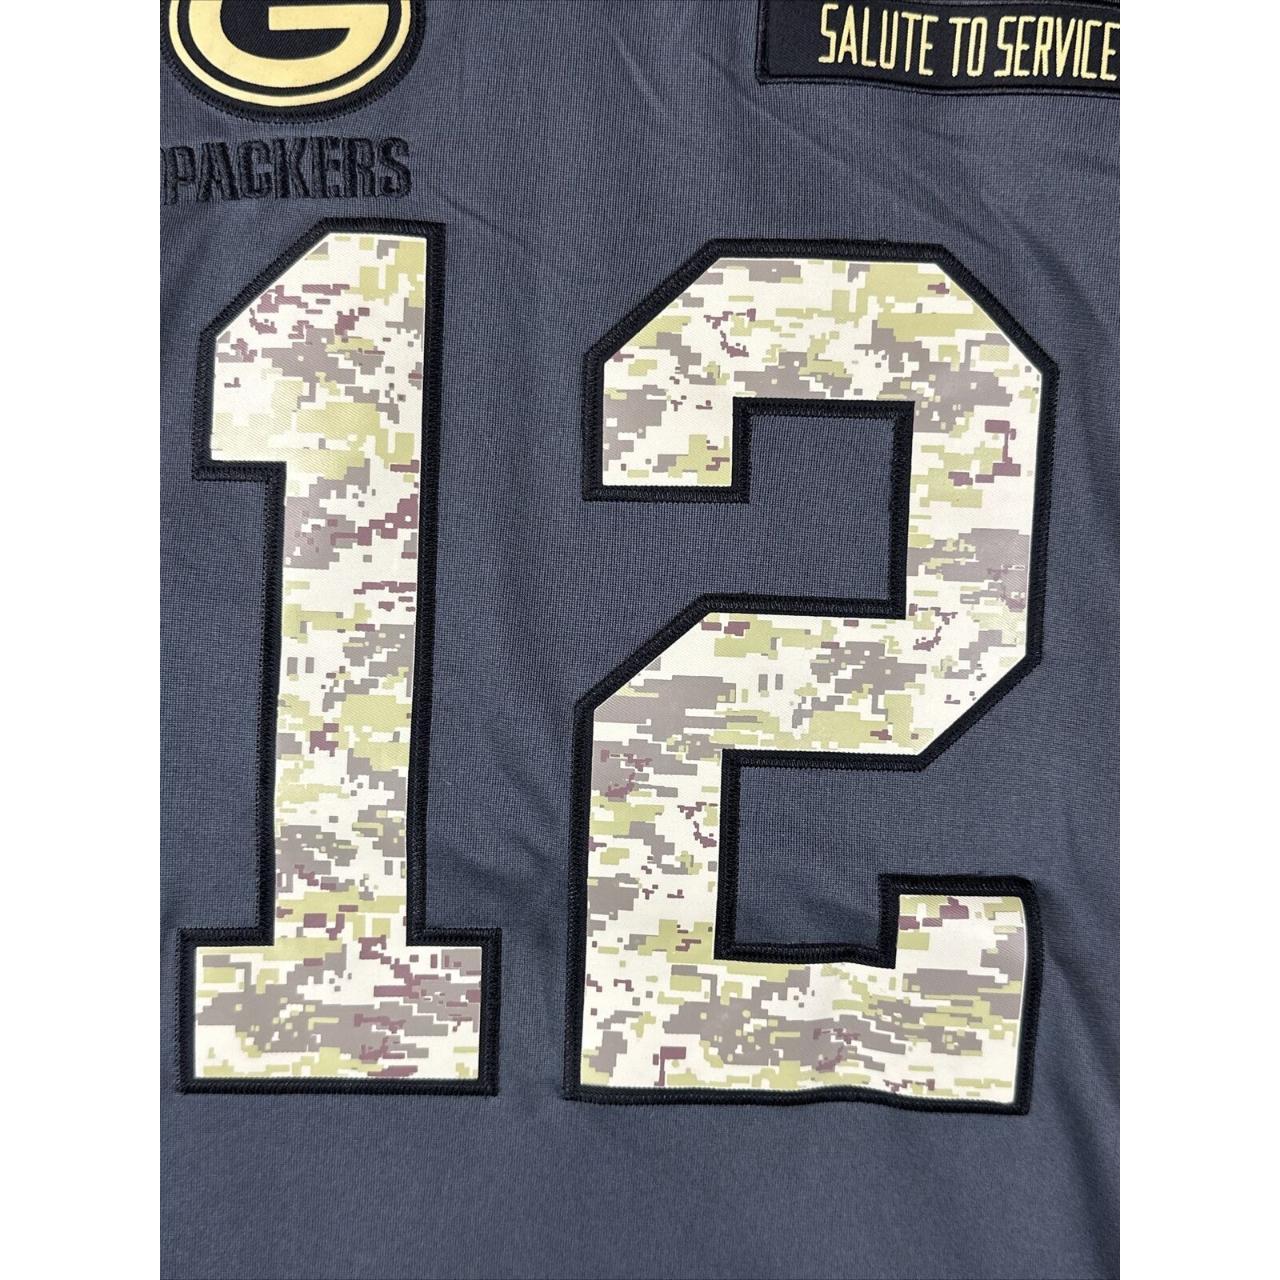 green bay packers salute to service jersey